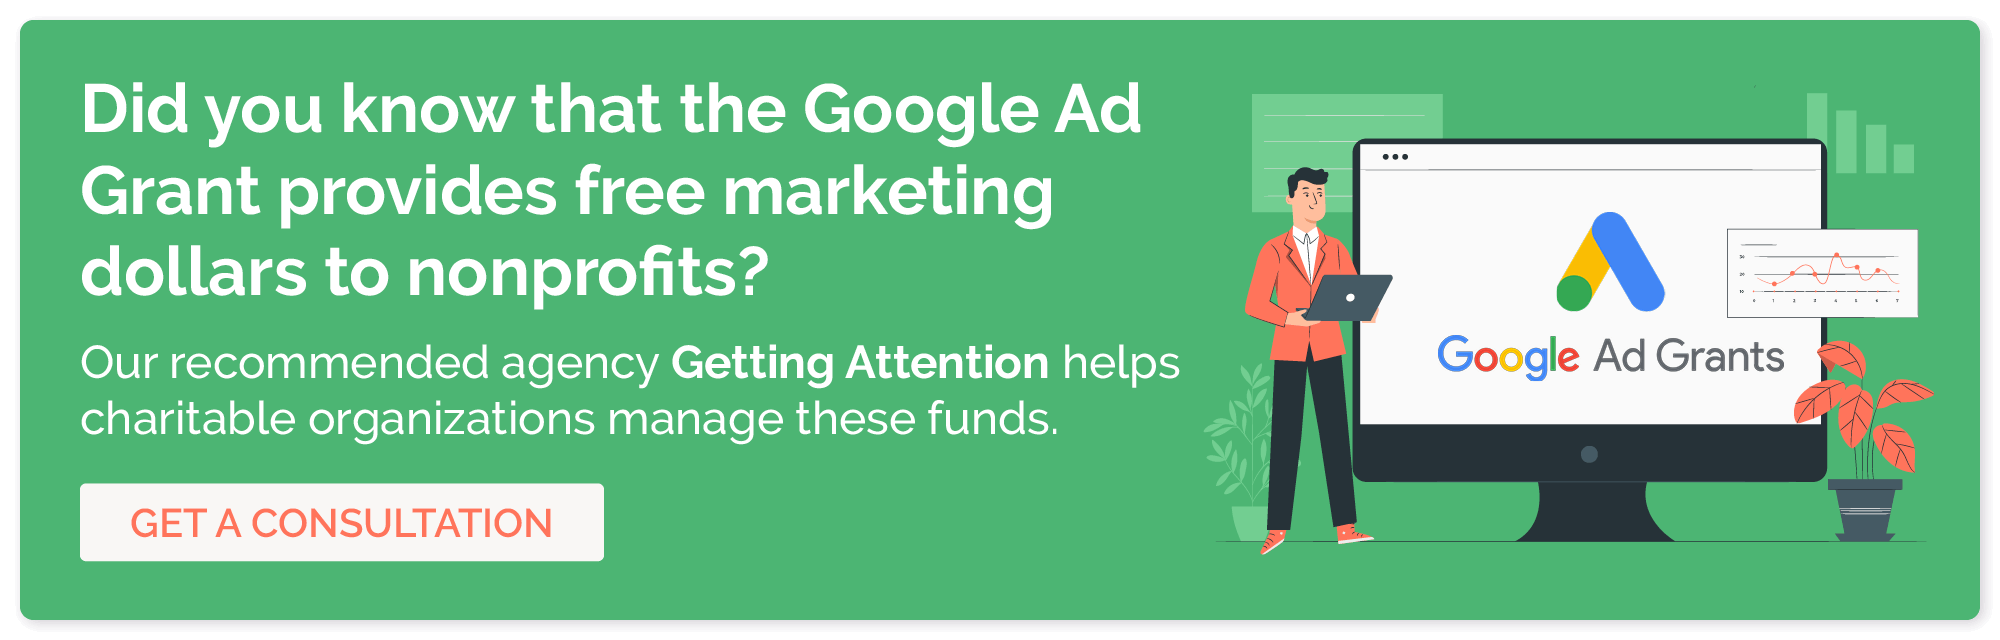 Get a consultation with Getting Attention for help with Google Ad Grant management.